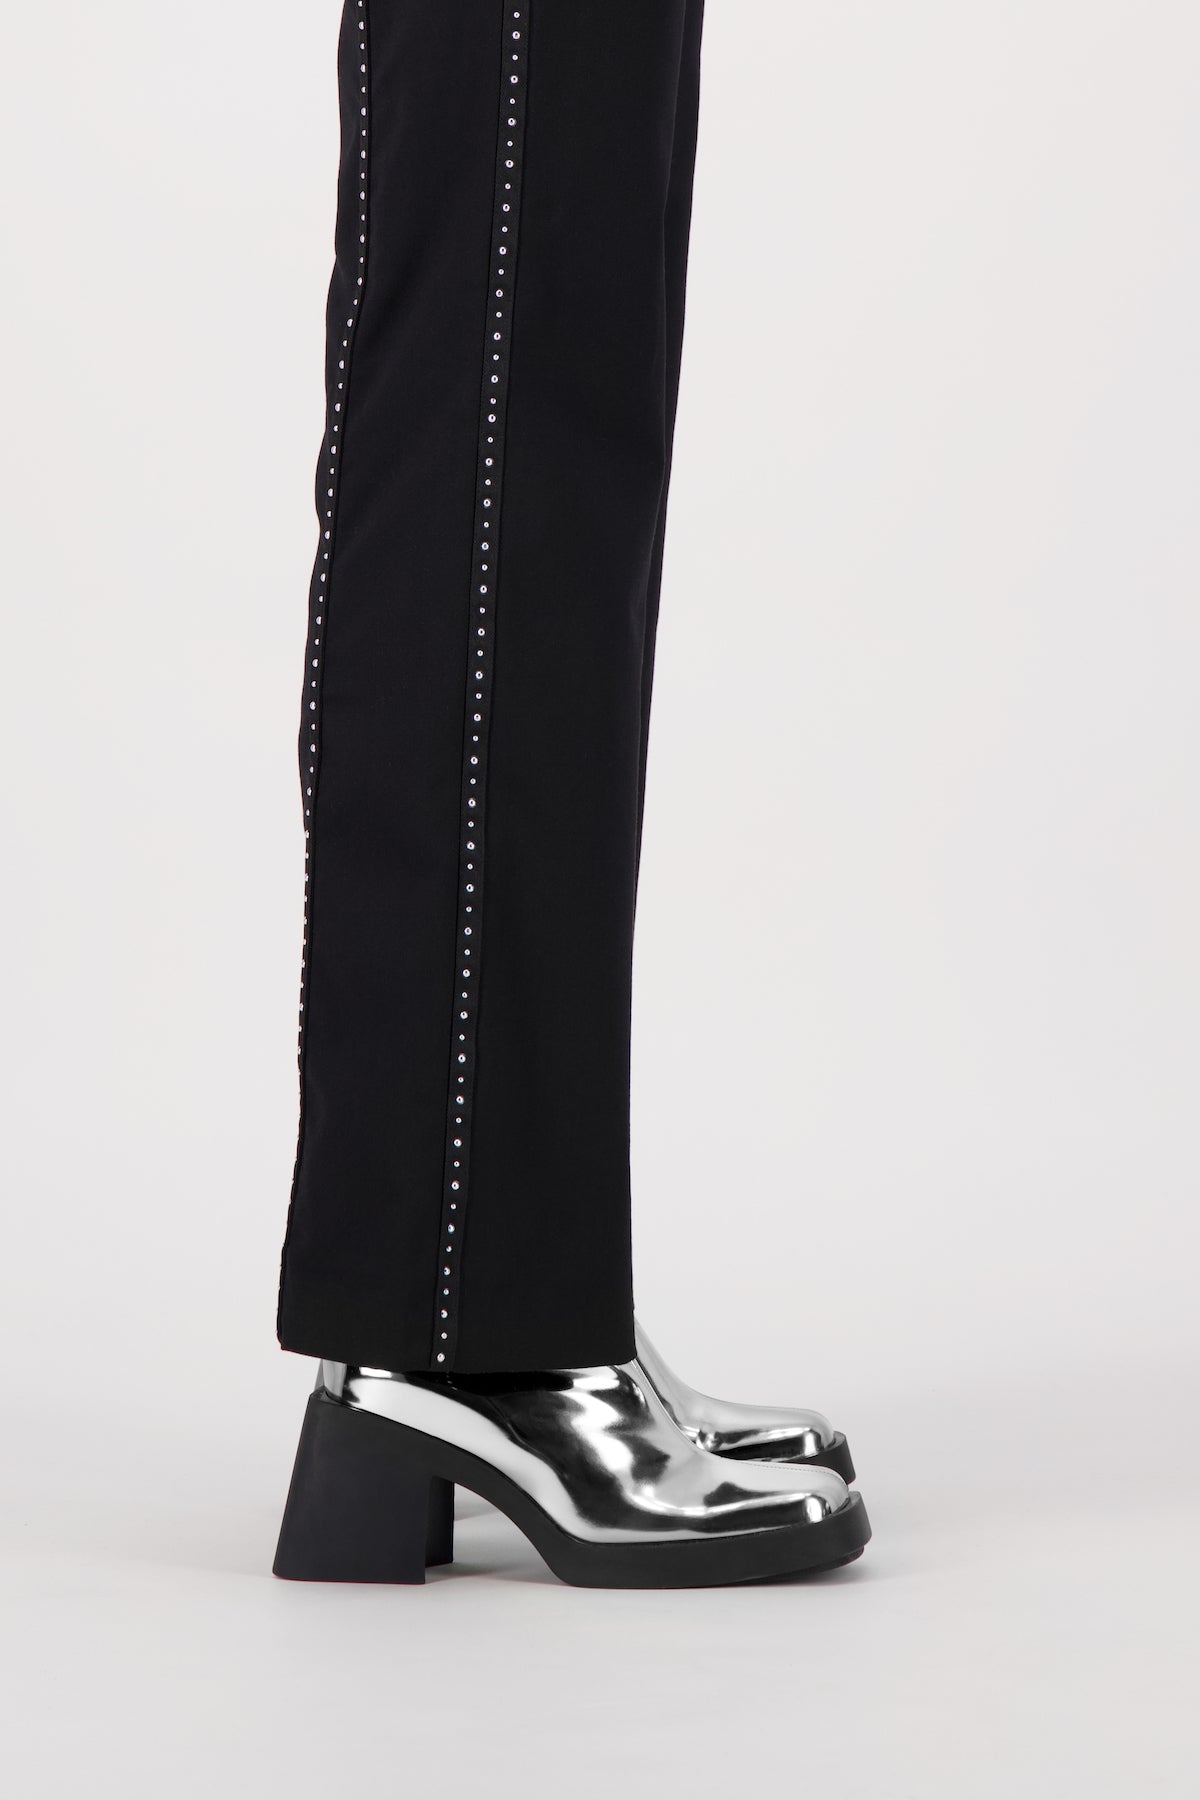 Milla metallic silver ankle boots